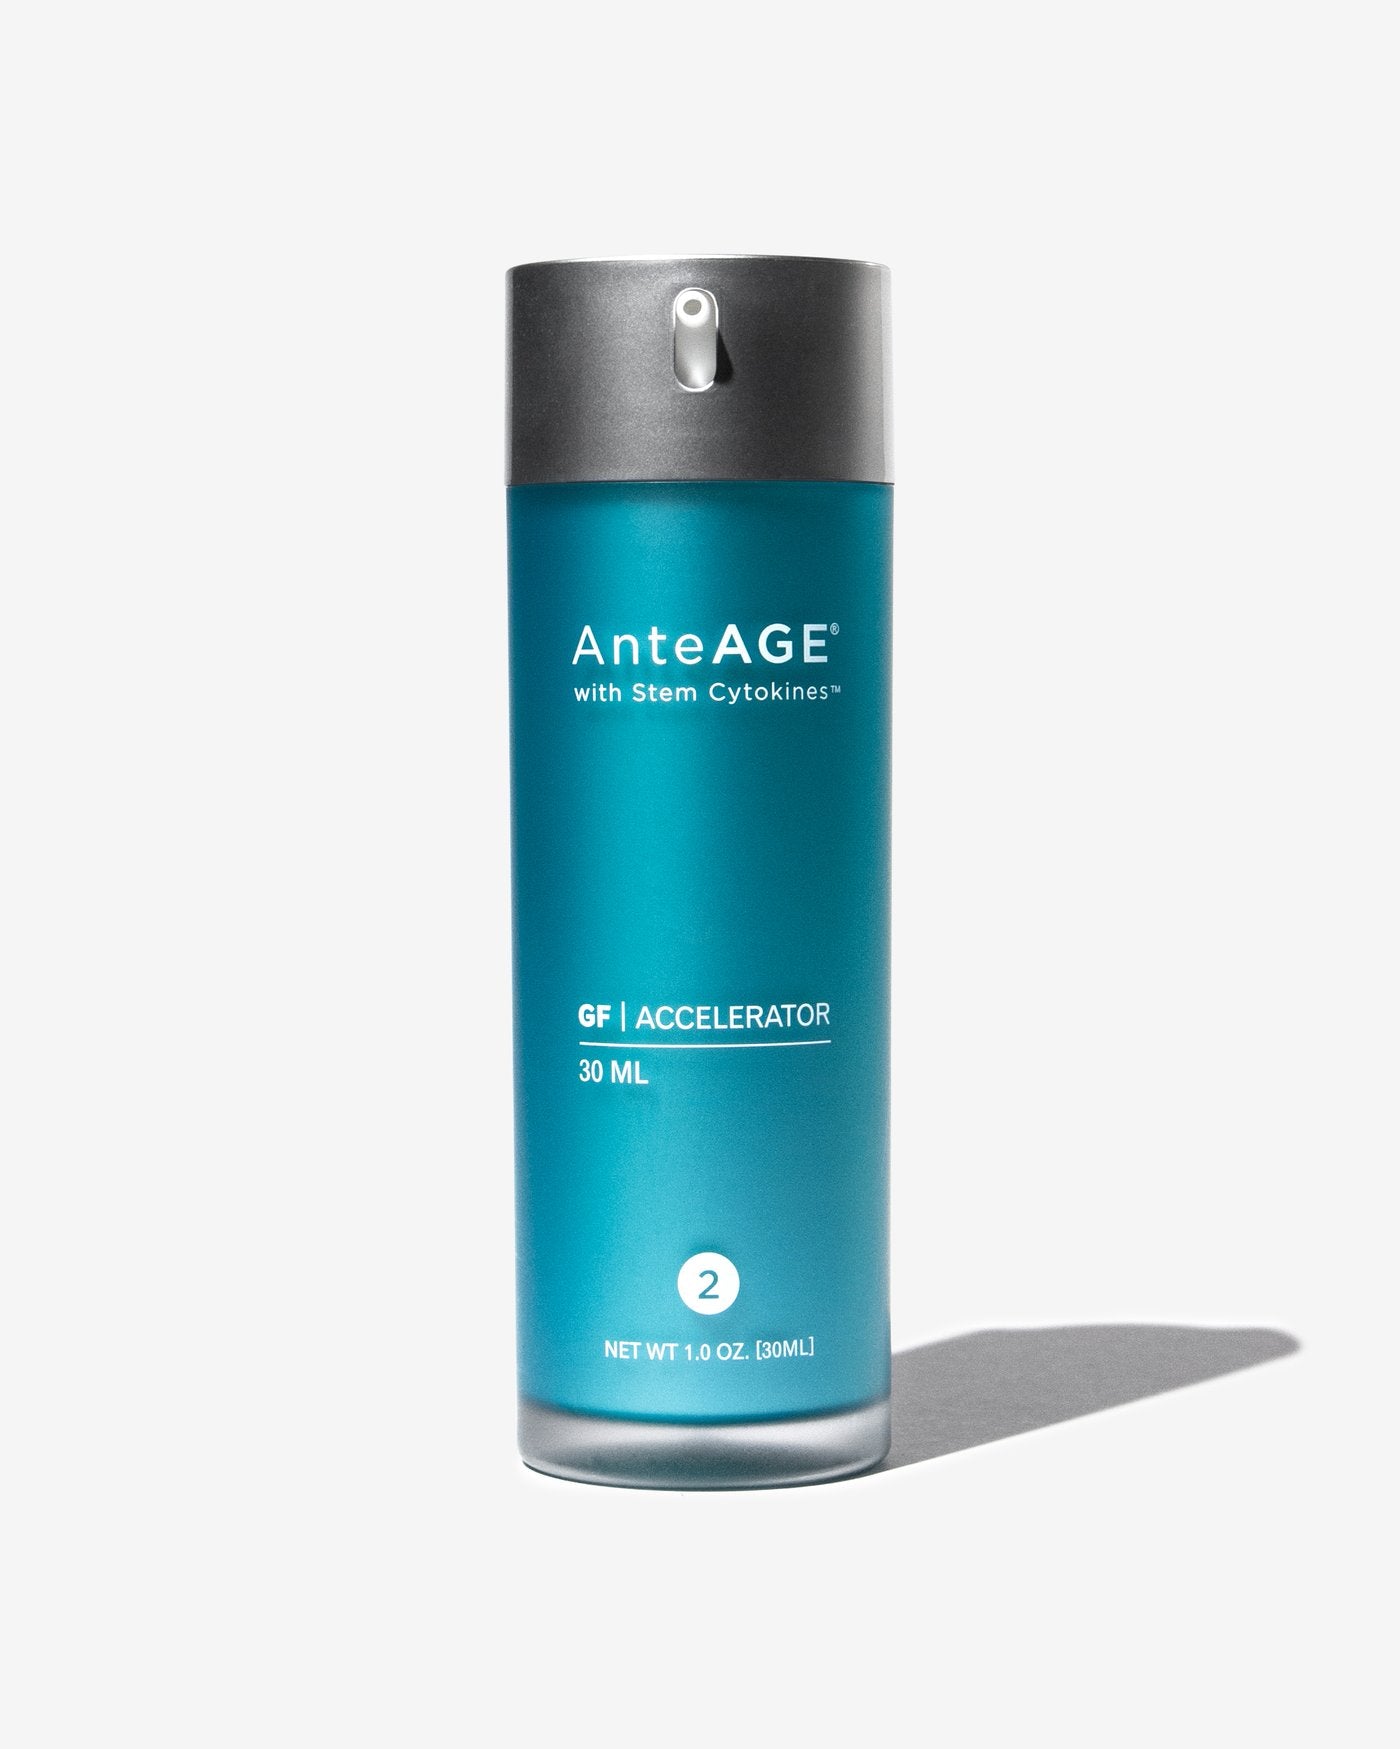 AnteAGE Accelerator - Click image to buy!